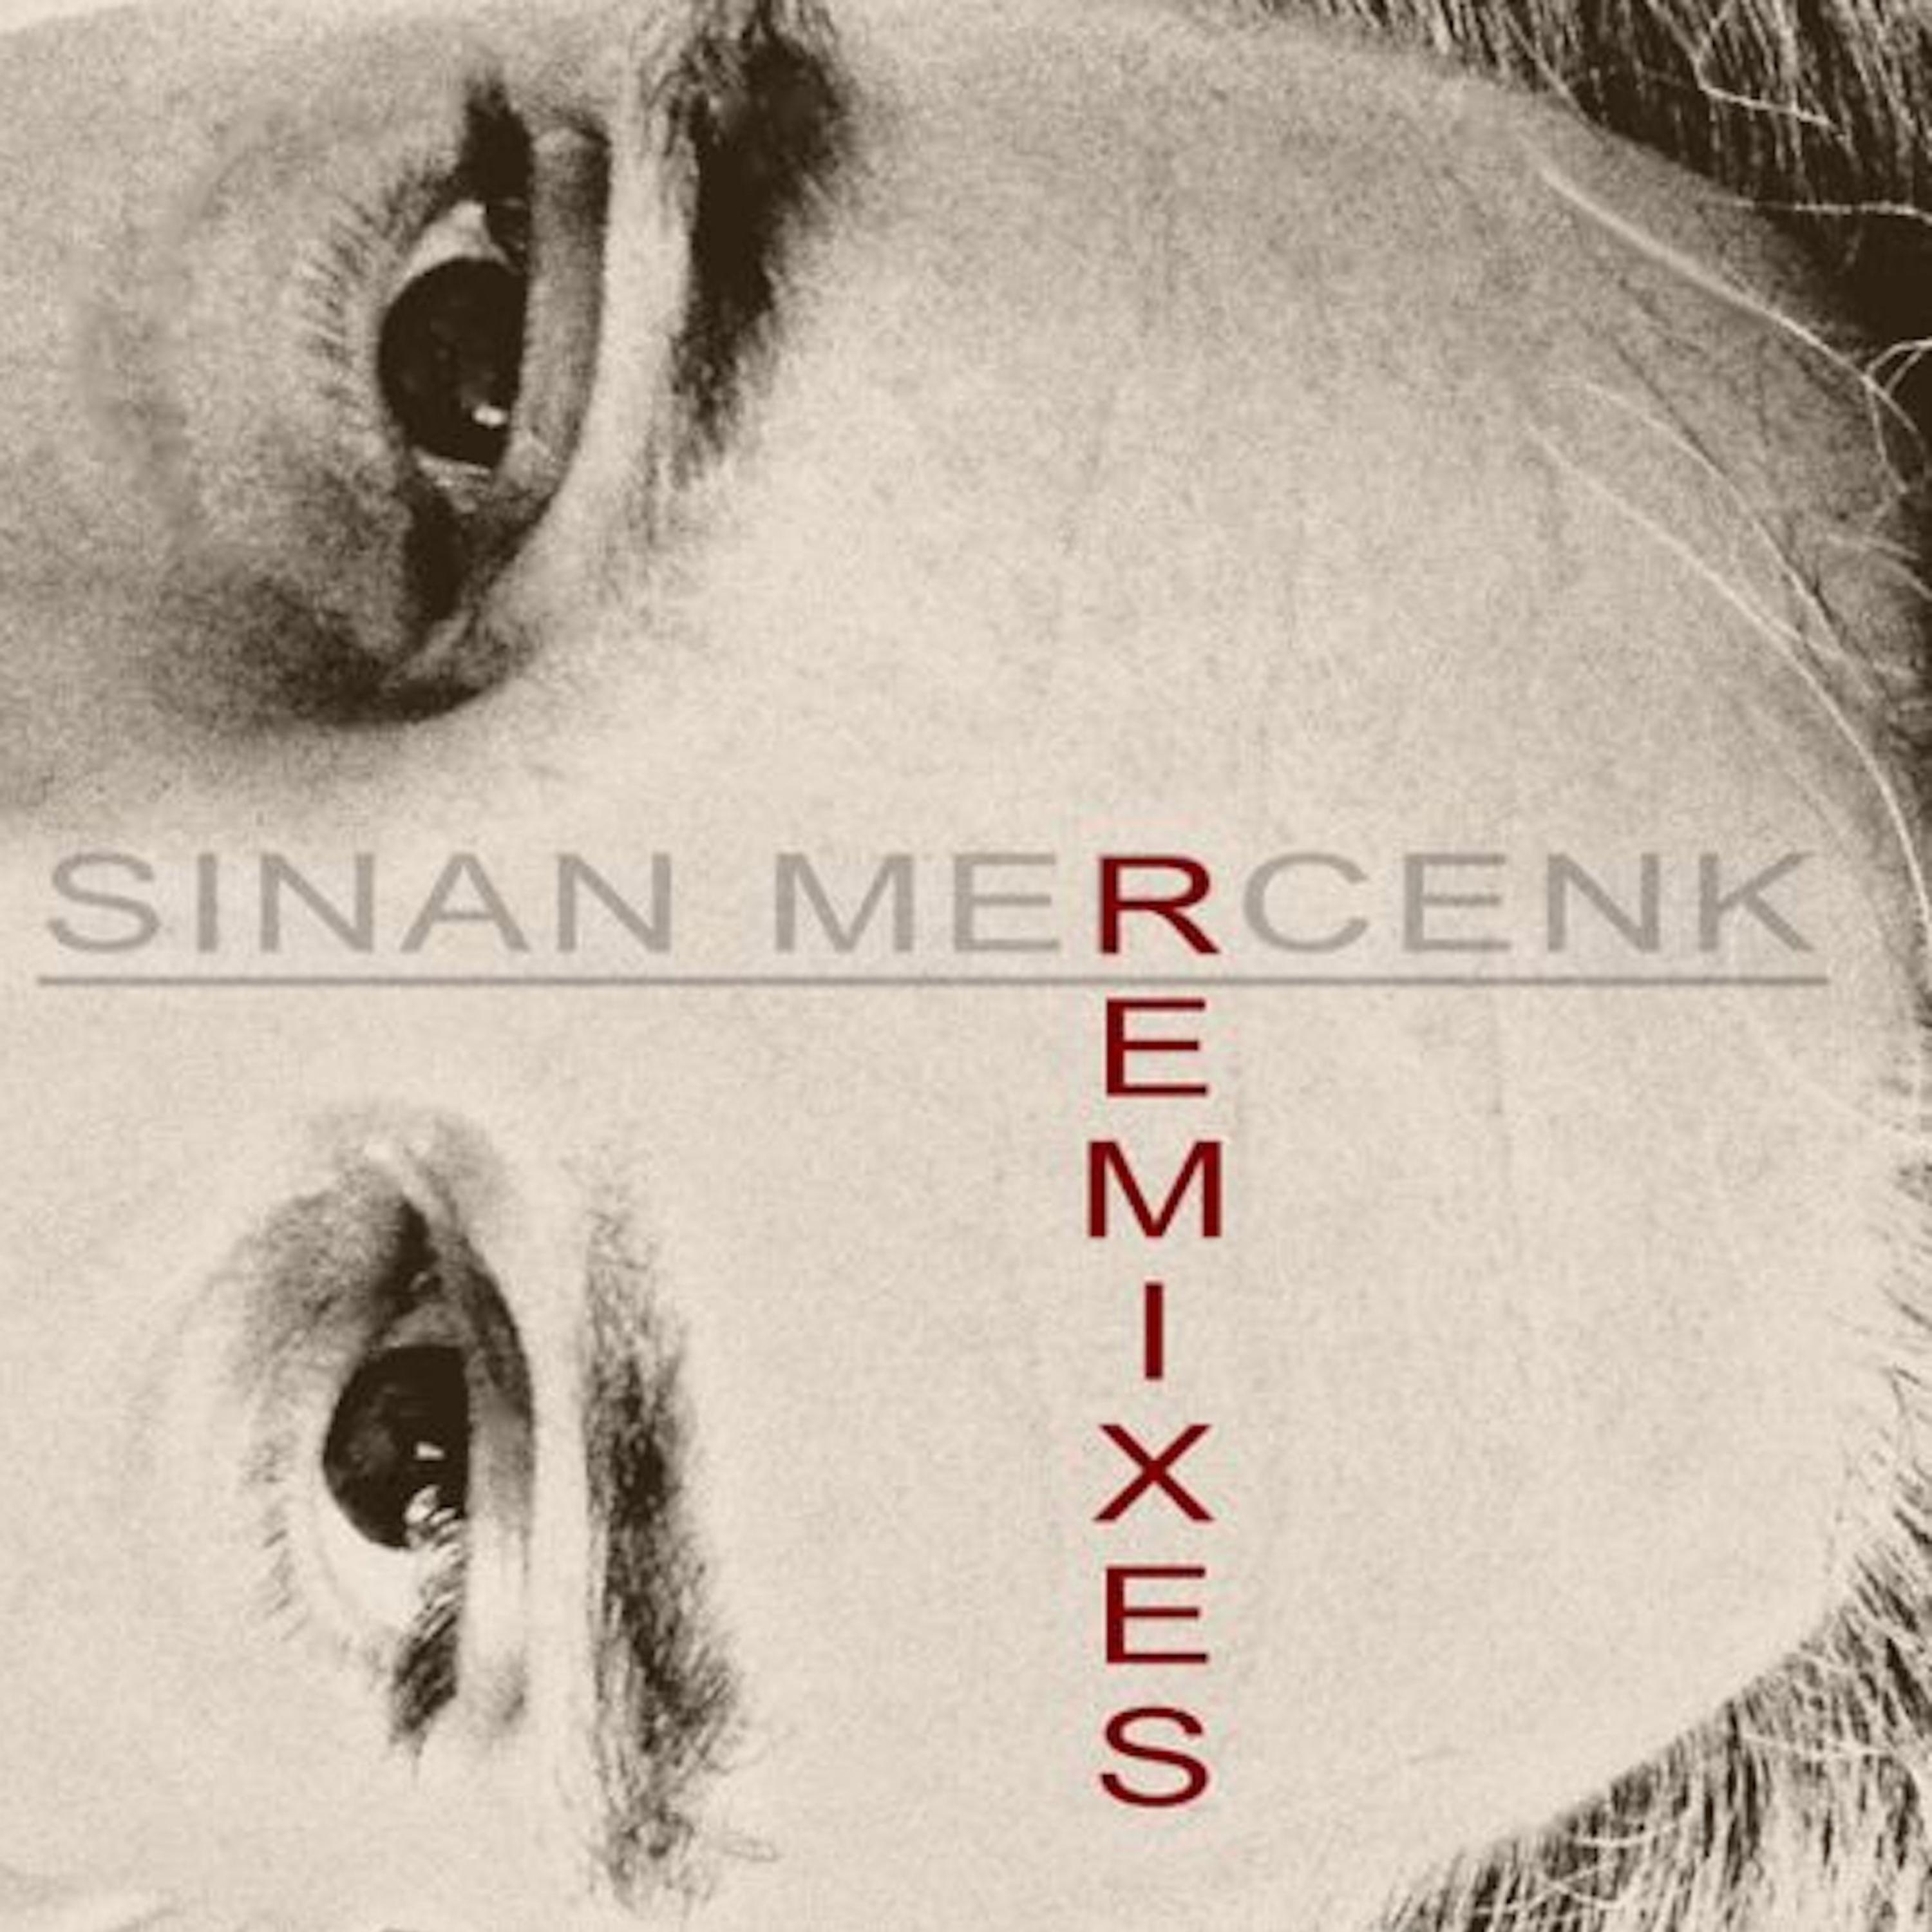 Can't Live Without You (Sinan Mercenk's Dub)